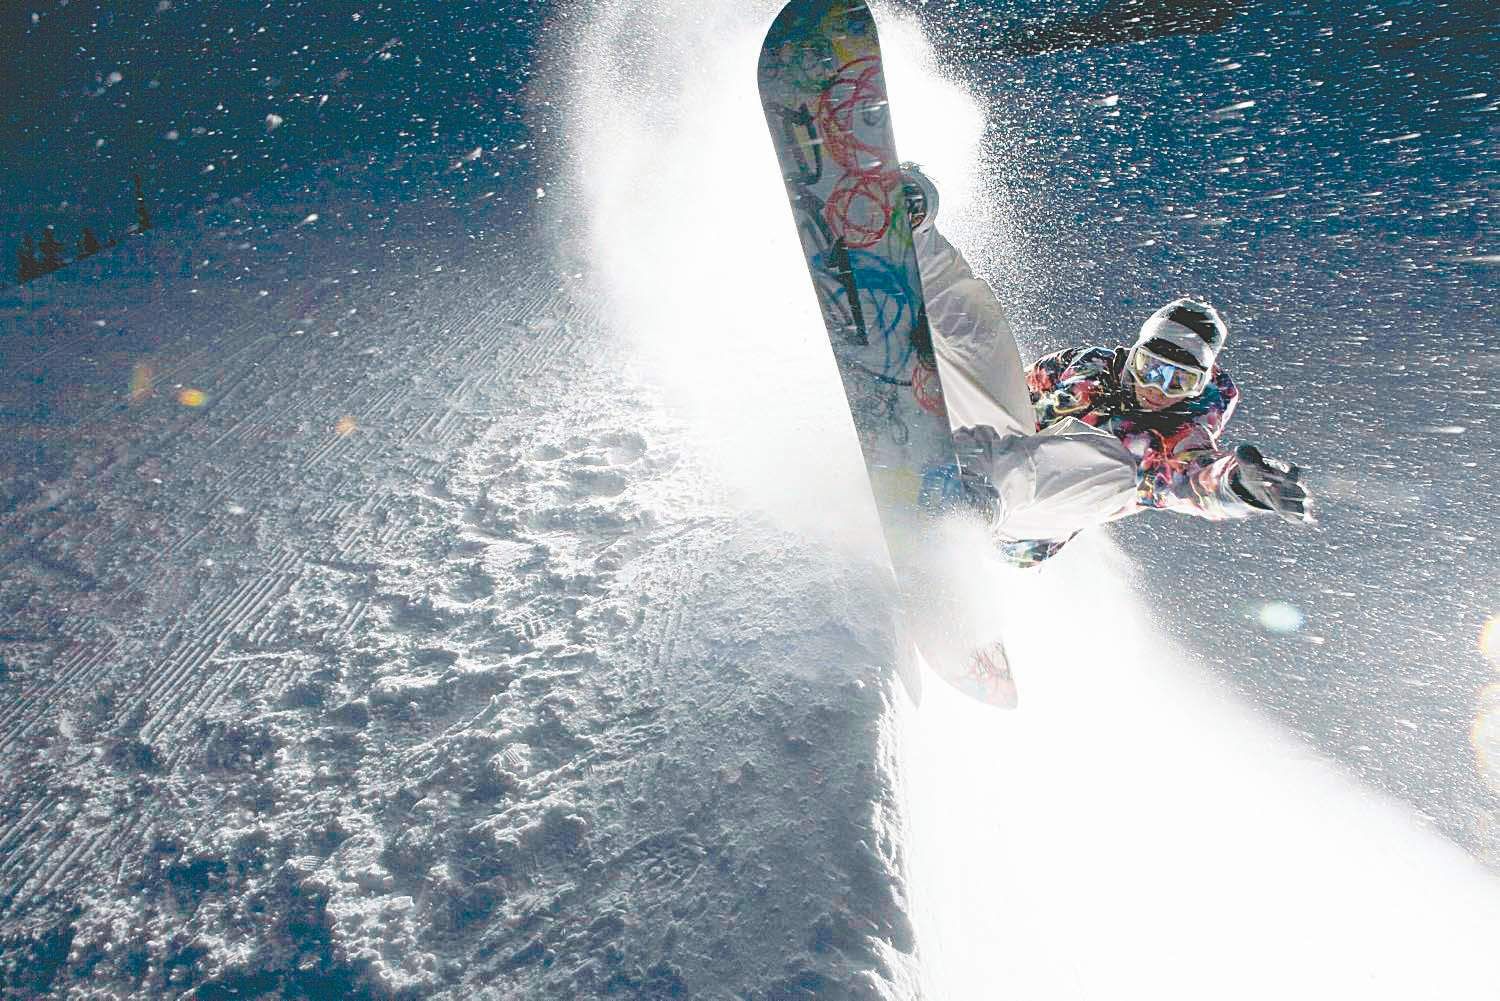 Kevin Pearce, the focus of The Crash Reel